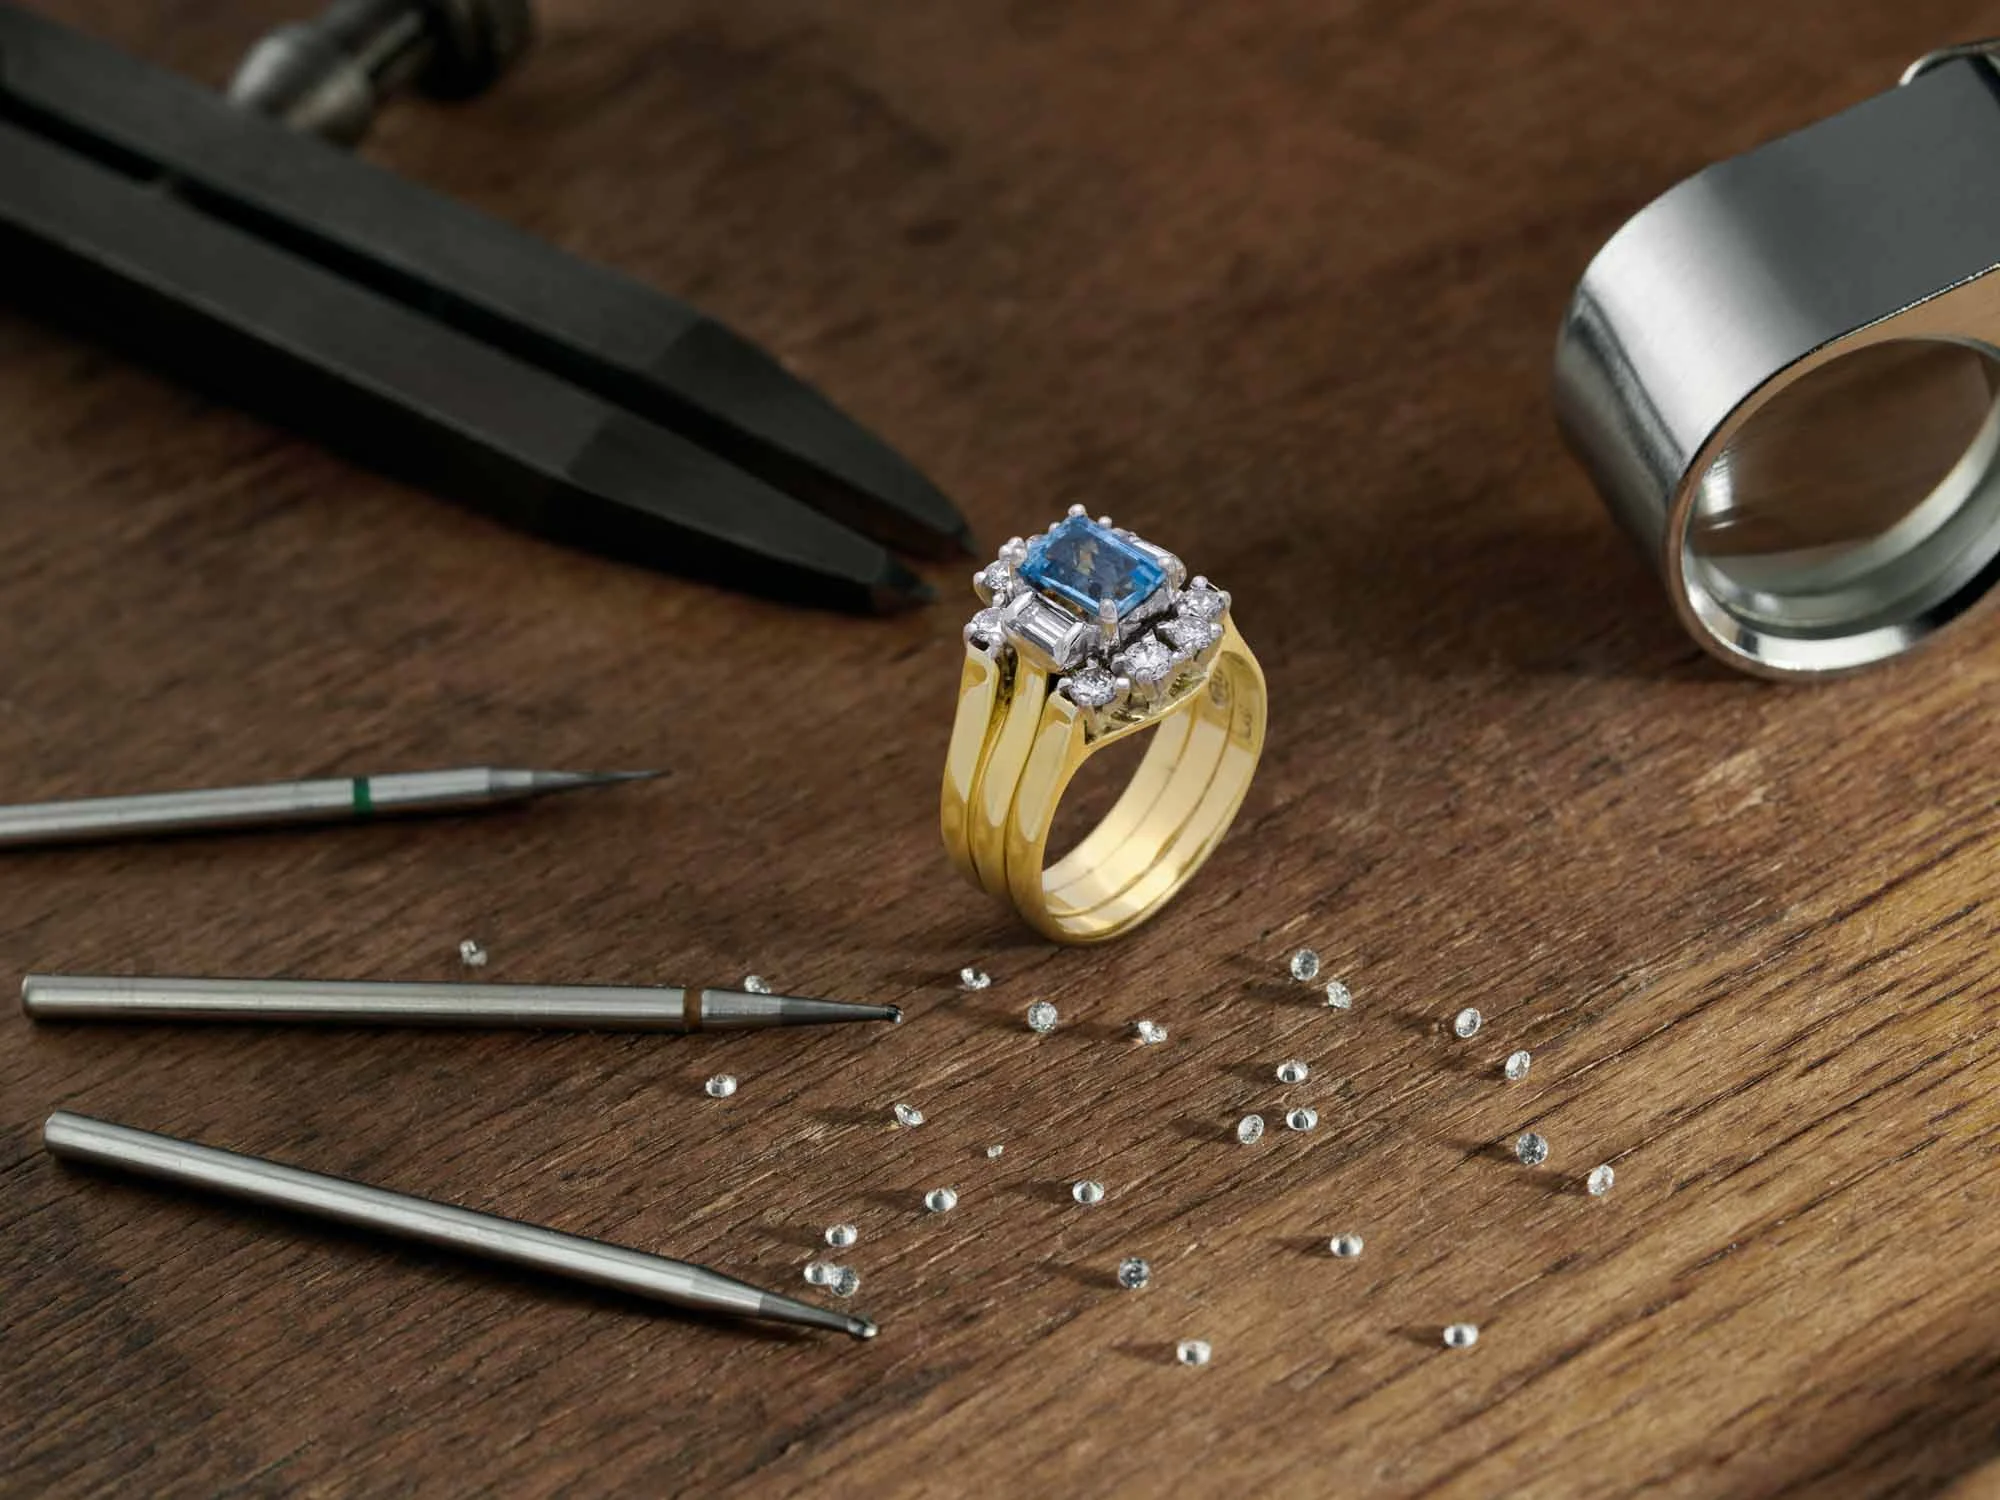 The Art of Gemstone Cutting: How to Choose The Right Cutting Style for Your Gemstone